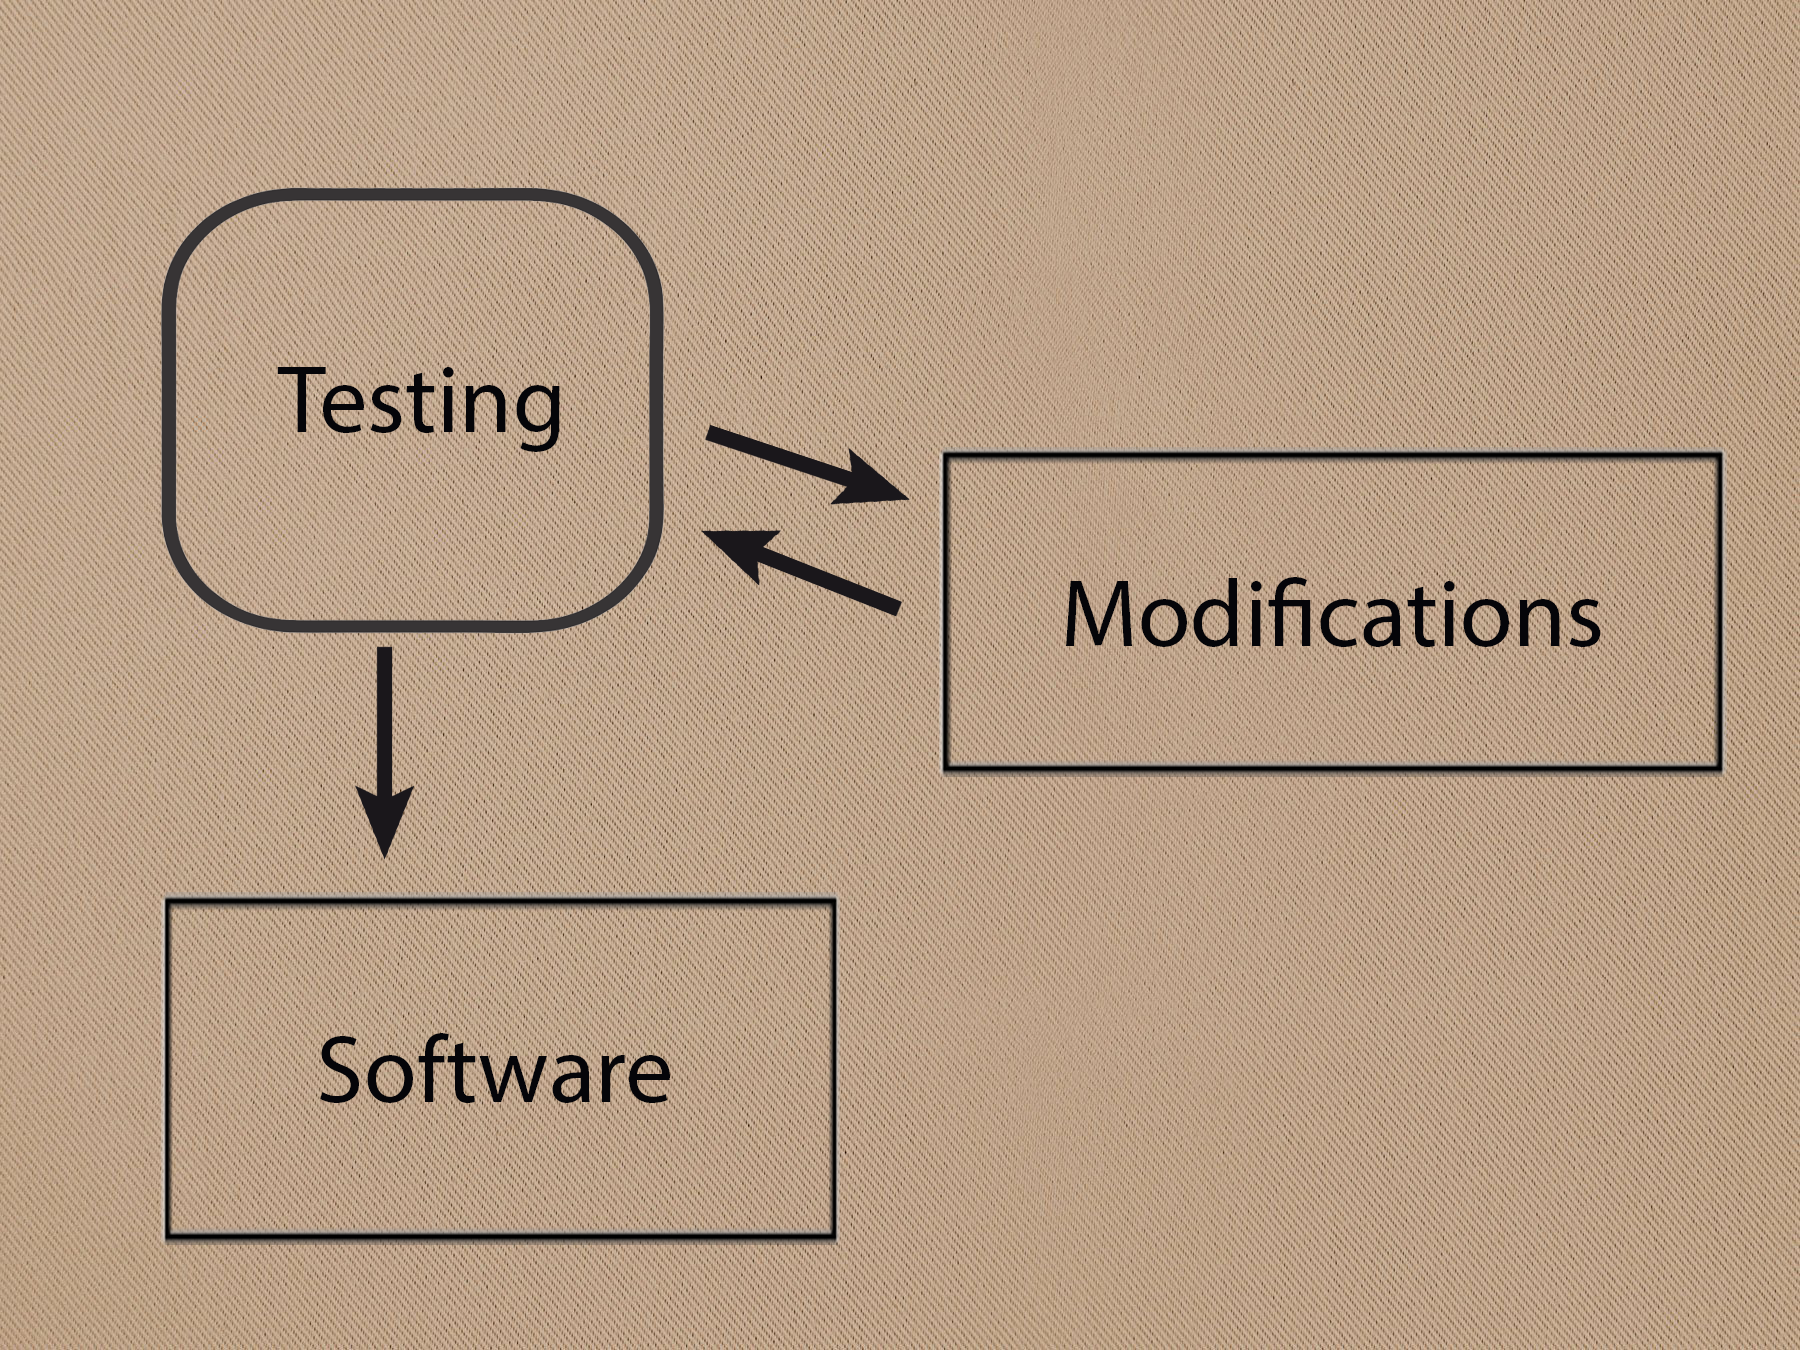 Testing-Software-Modifications